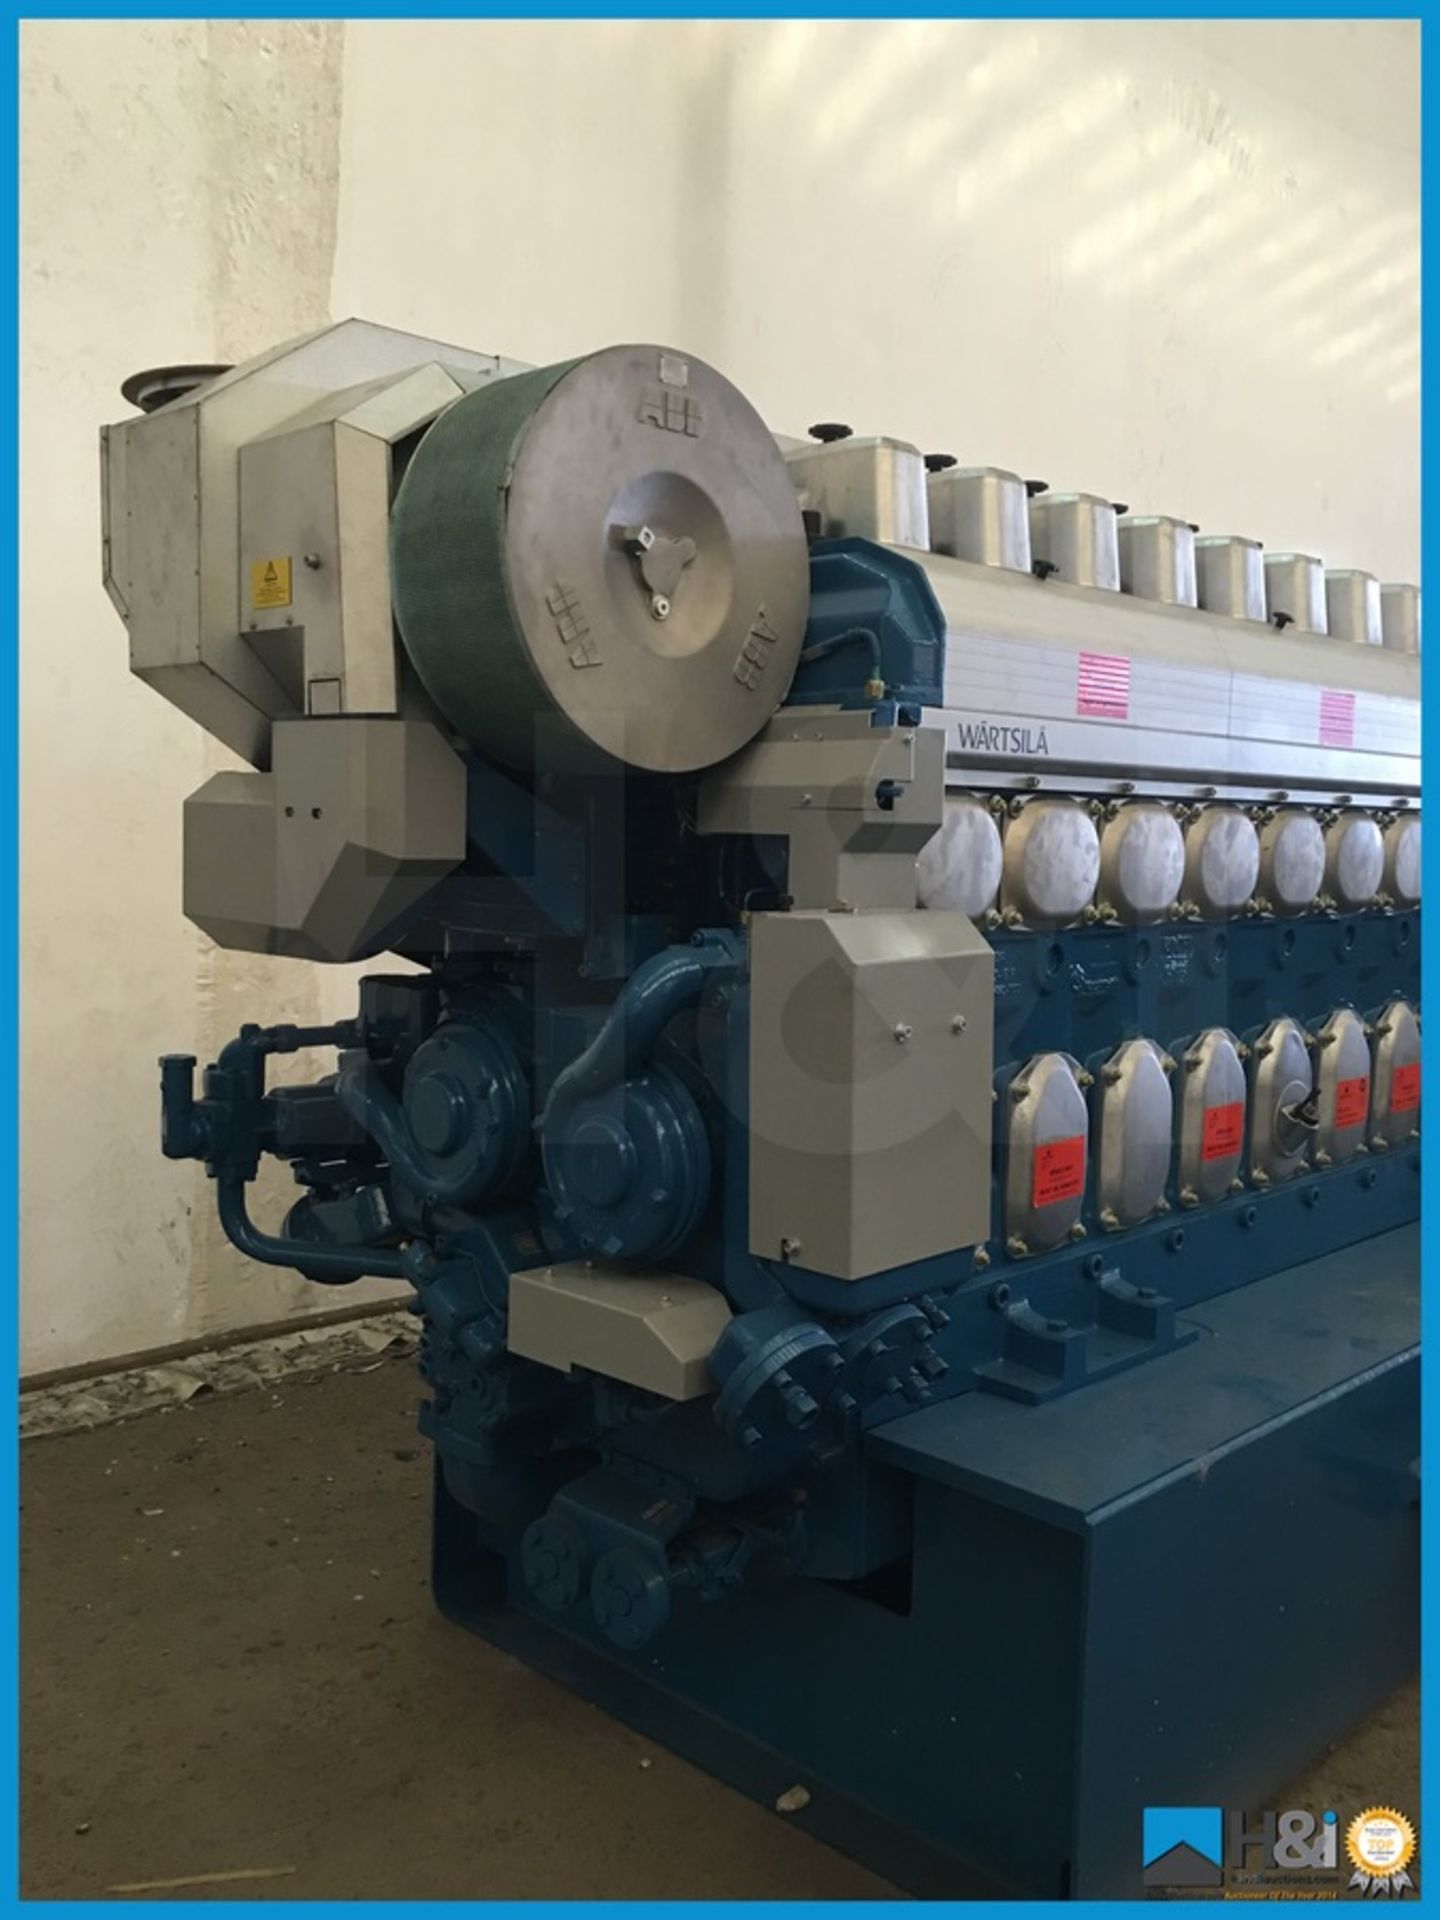 Unused Wartsila 9L20 high capacity diesel generator manufactured in 2013 for a large marine - Image 4 of 17